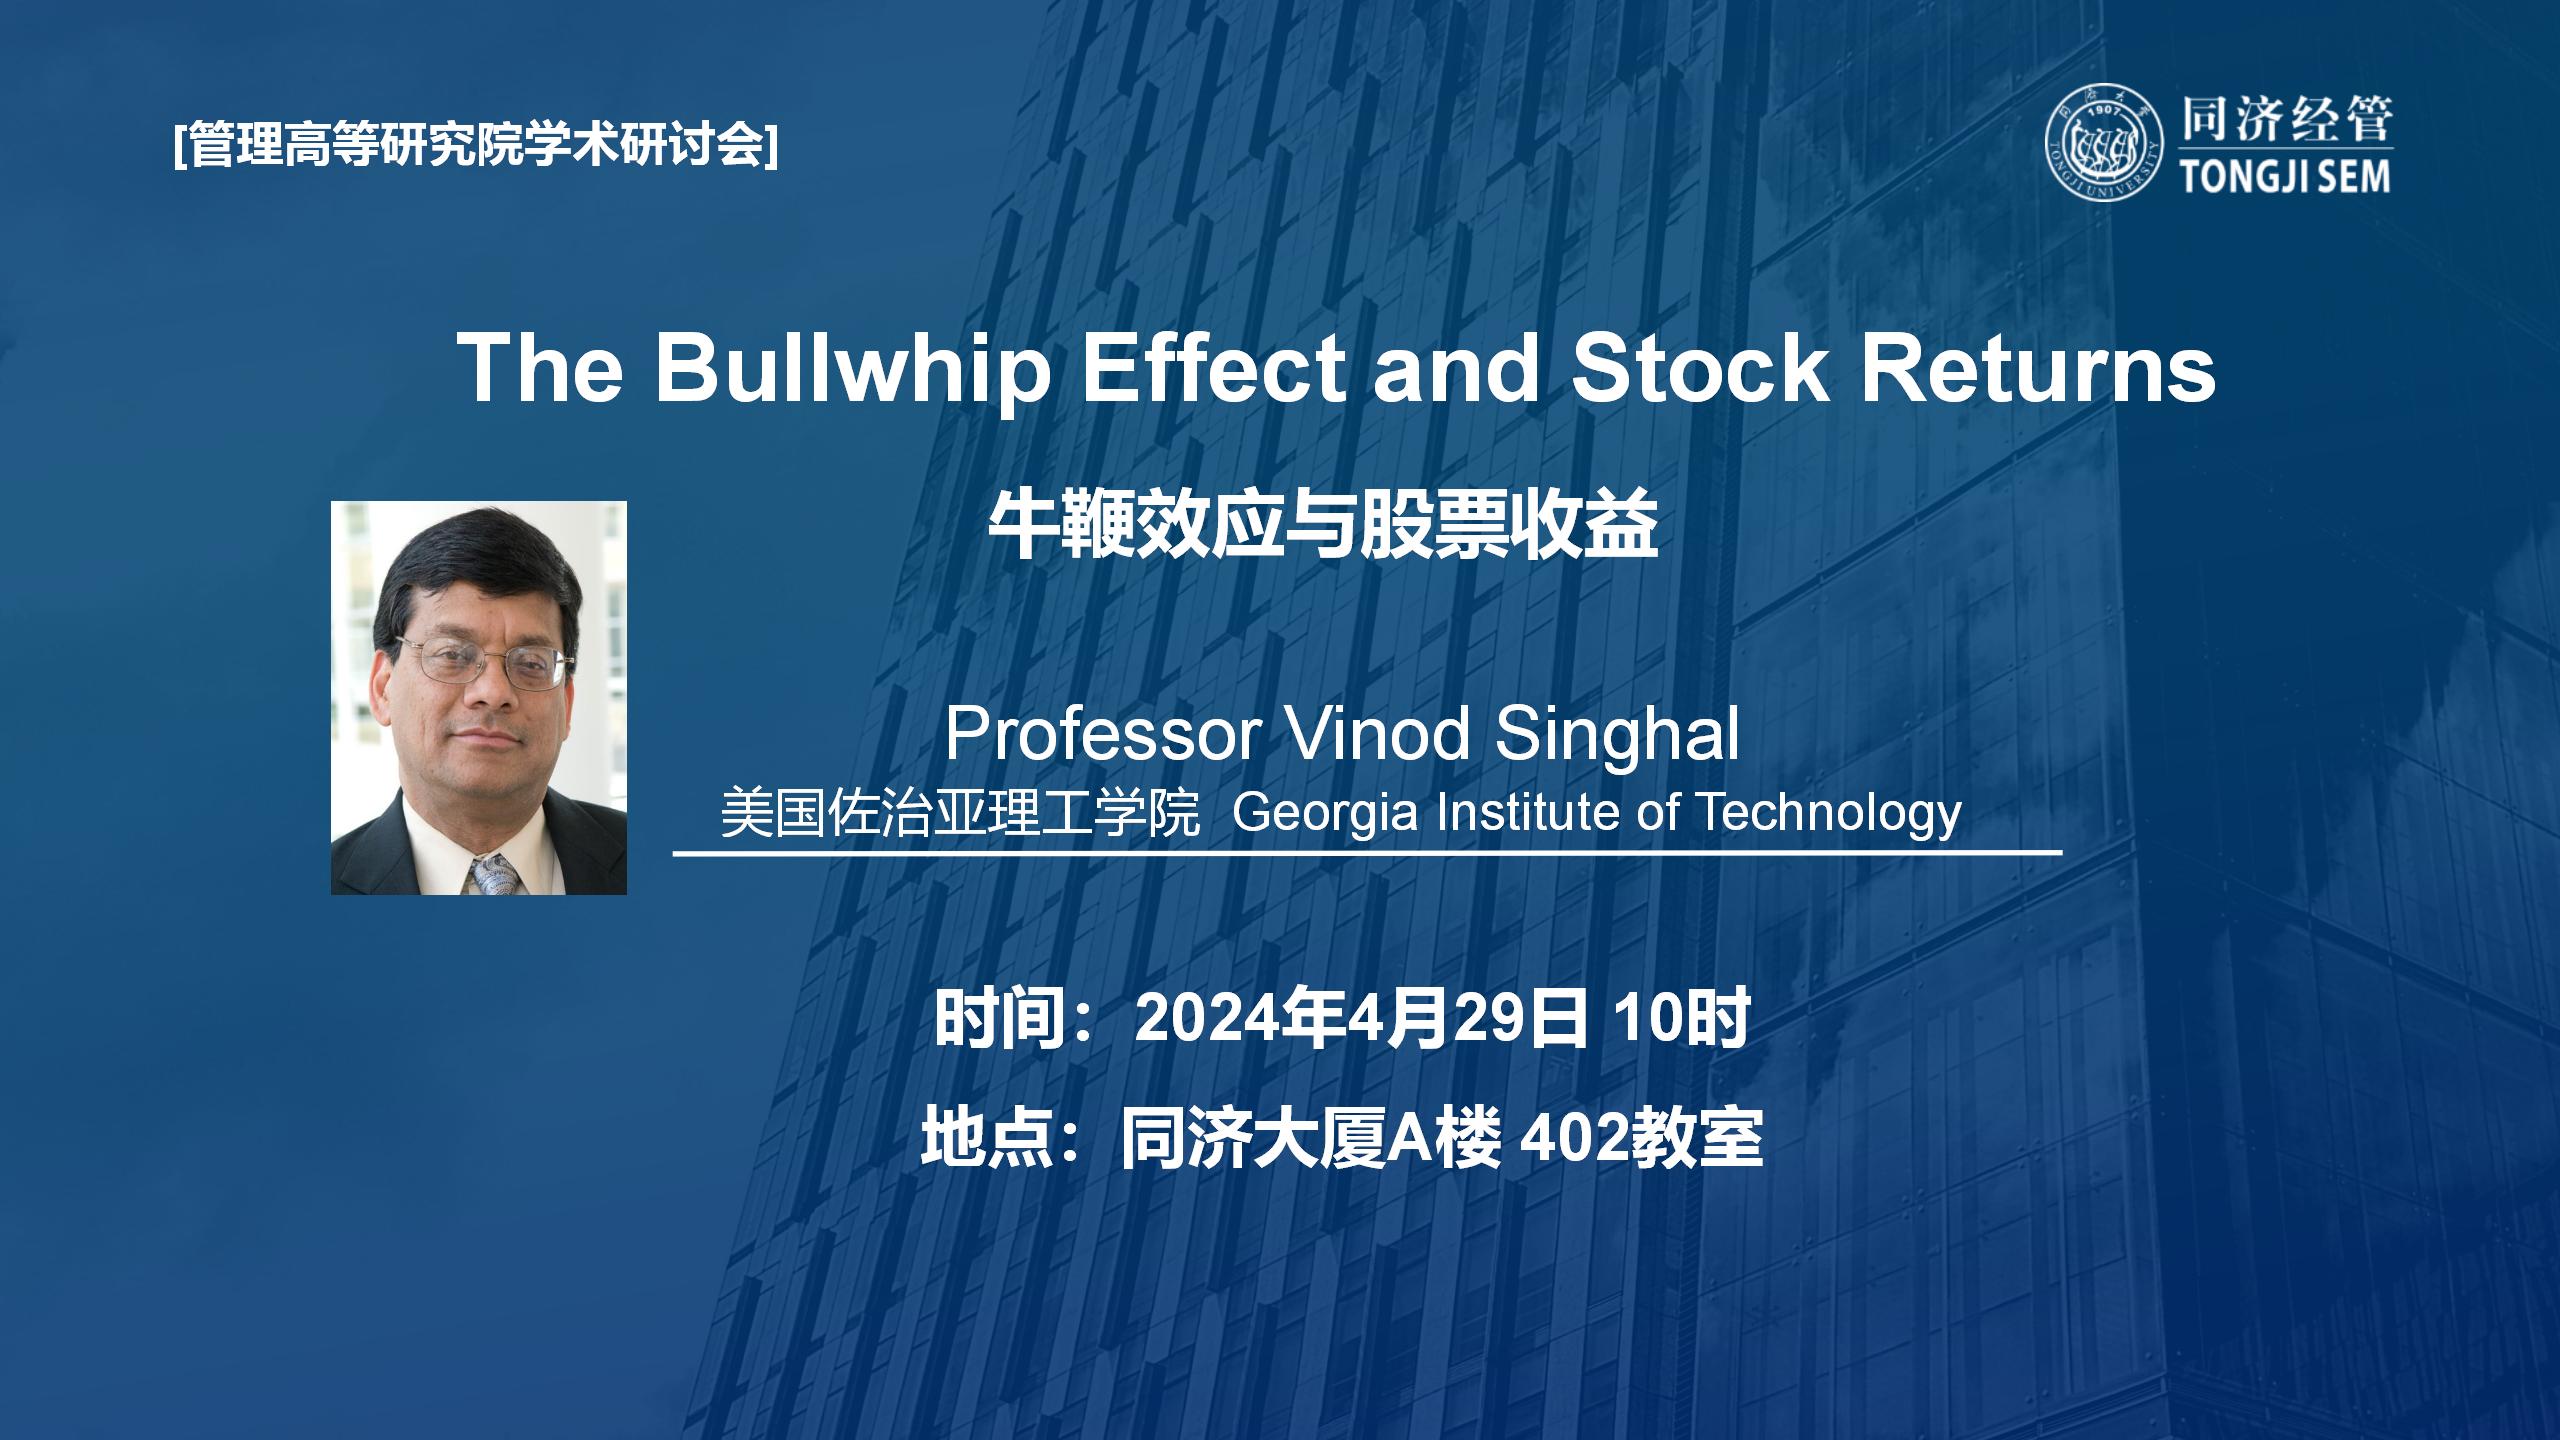  The Bullwhip Effect and Stock Returns